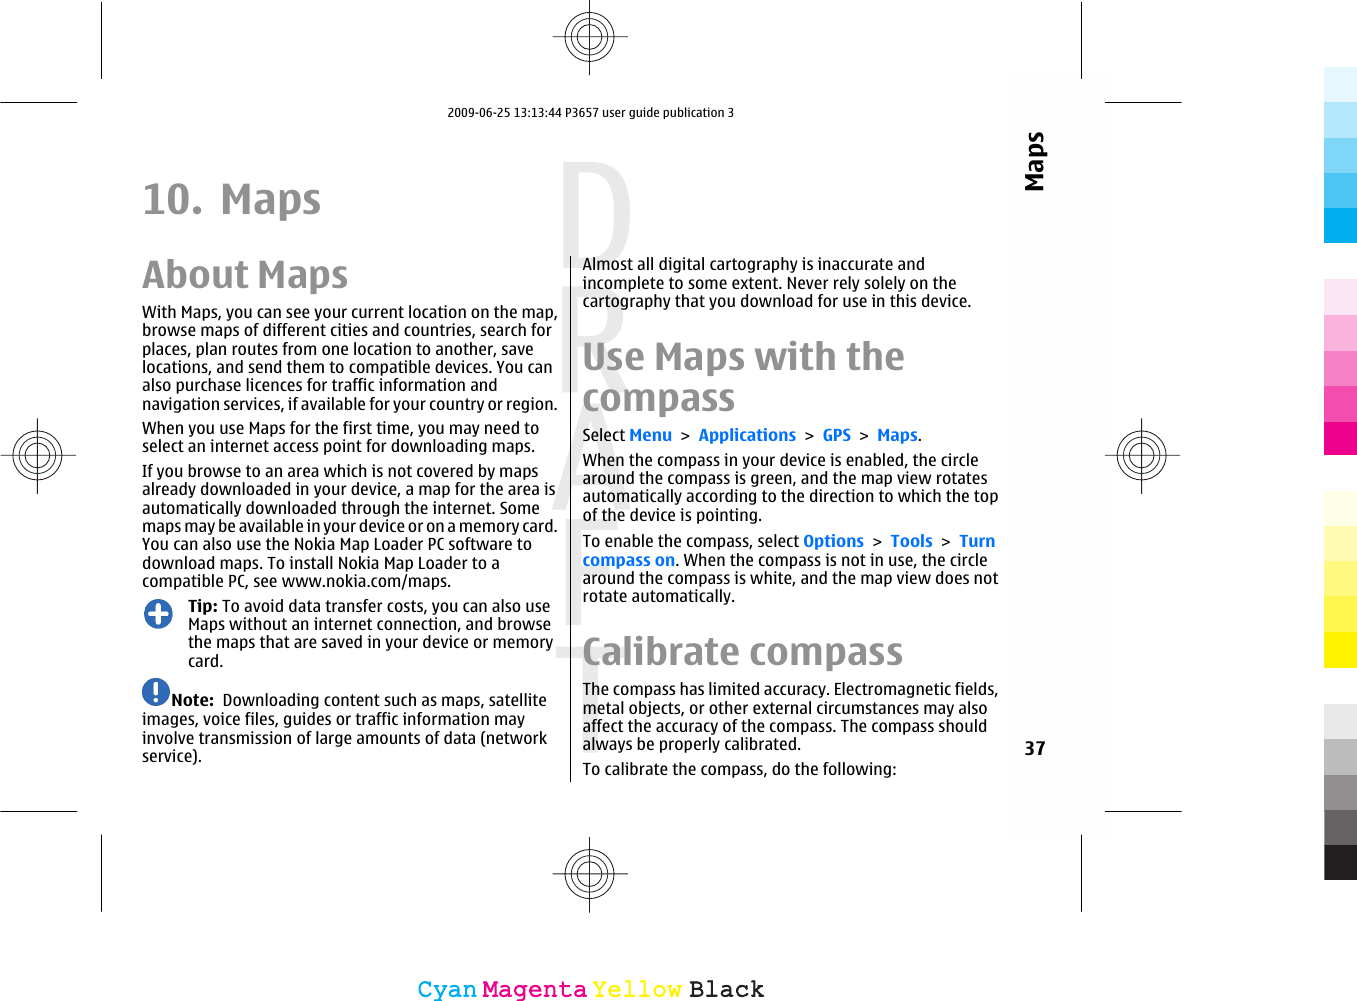 10. MapsAbout MapsWith Maps, you can see your current location on the map,browse maps of different cities and countries, search forplaces, plan routes from one location to another, savelocations, and send them to compatible devices. You canalso purchase licences for traffic information andnavigation services, if available for your country or region.When you use Maps for the first time, you may need toselect an internet access point for downloading maps.If you browse to an area which is not covered by mapsalready downloaded in your device, a map for the area isautomatically downloaded through the internet. Somemaps may be available in your device or on a memory card.You can also use the Nokia Map Loader PC software todownload maps. To install Nokia Map Loader to acompatible PC, see www.nokia.com/maps.Tip: To avoid data transfer costs, you can also useMaps without an internet connection, and browsethe maps that are saved in your device or memorycard.Note:  Downloading content such as maps, satelliteimages, voice files, guides or traffic information mayinvolve transmission of large amounts of data (networkservice).Almost all digital cartography is inaccurate andincomplete to some extent. Never rely solely on thecartography that you download for use in this device.Use Maps with thecompassSelect Menu &gt; Applications &gt; GPS &gt; Maps.When the compass in your device is enabled, the circlearound the compass is green, and the map view rotatesautomatically according to the direction to which the topof the device is pointing.To enable the compass, select Options &gt; Tools &gt; Turncompass on. When the compass is not in use, the circlearound the compass is white, and the map view does notrotate automatically.Calibrate compassThe compass has limited accuracy. Electromagnetic fields,metal objects, or other external circumstances may alsoaffect the accuracy of the compass. The compass shouldalways be properly calibrated.To calibrate the compass, do the following:37MapsCyanCyanMagentaMagentaYellowYellowBlackBlack2009-06-25 13:13:44 P3657 user guide publication 3